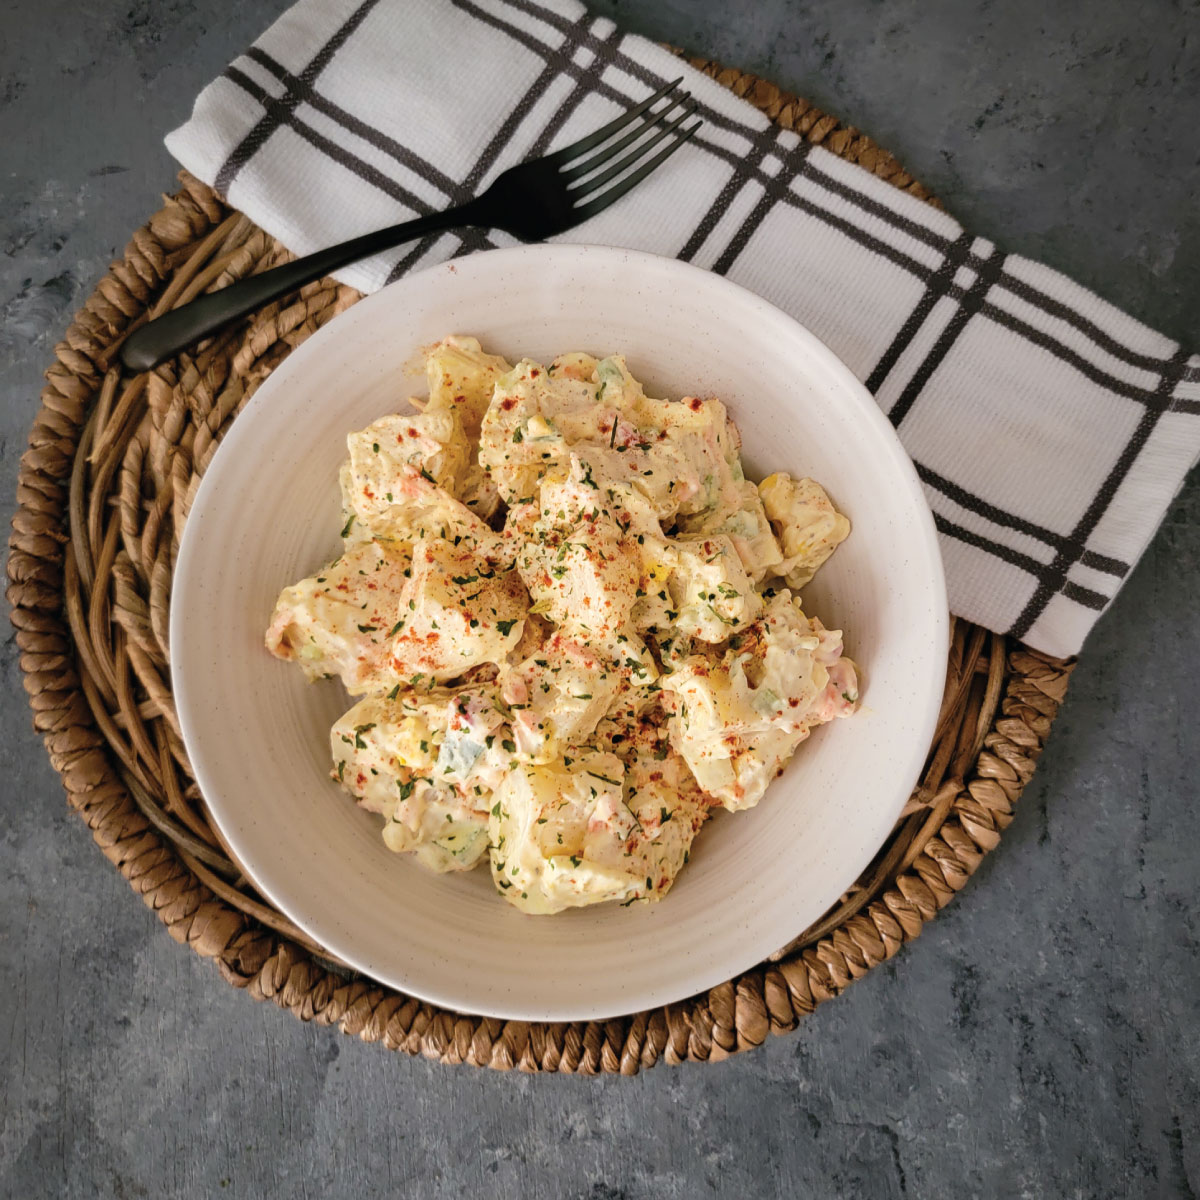 Potato salad prepared and in the bowl ready to be served